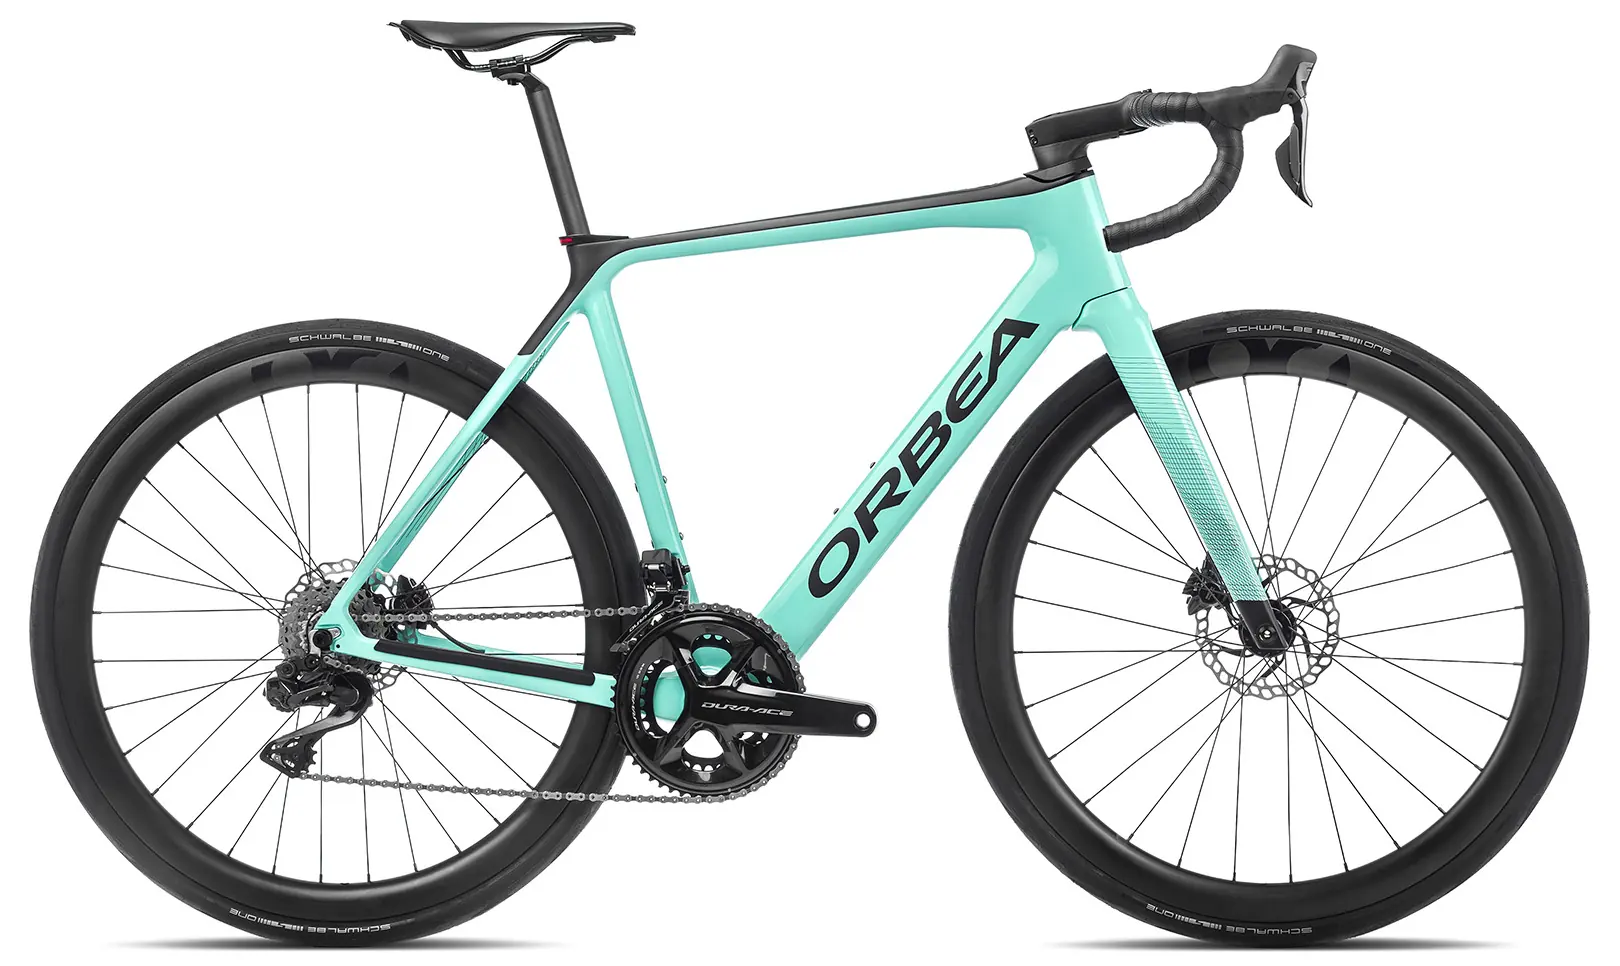 Orbea Gain M10i Electric Road Bike Lightweight Carbon Frame Turquoise M 52cm